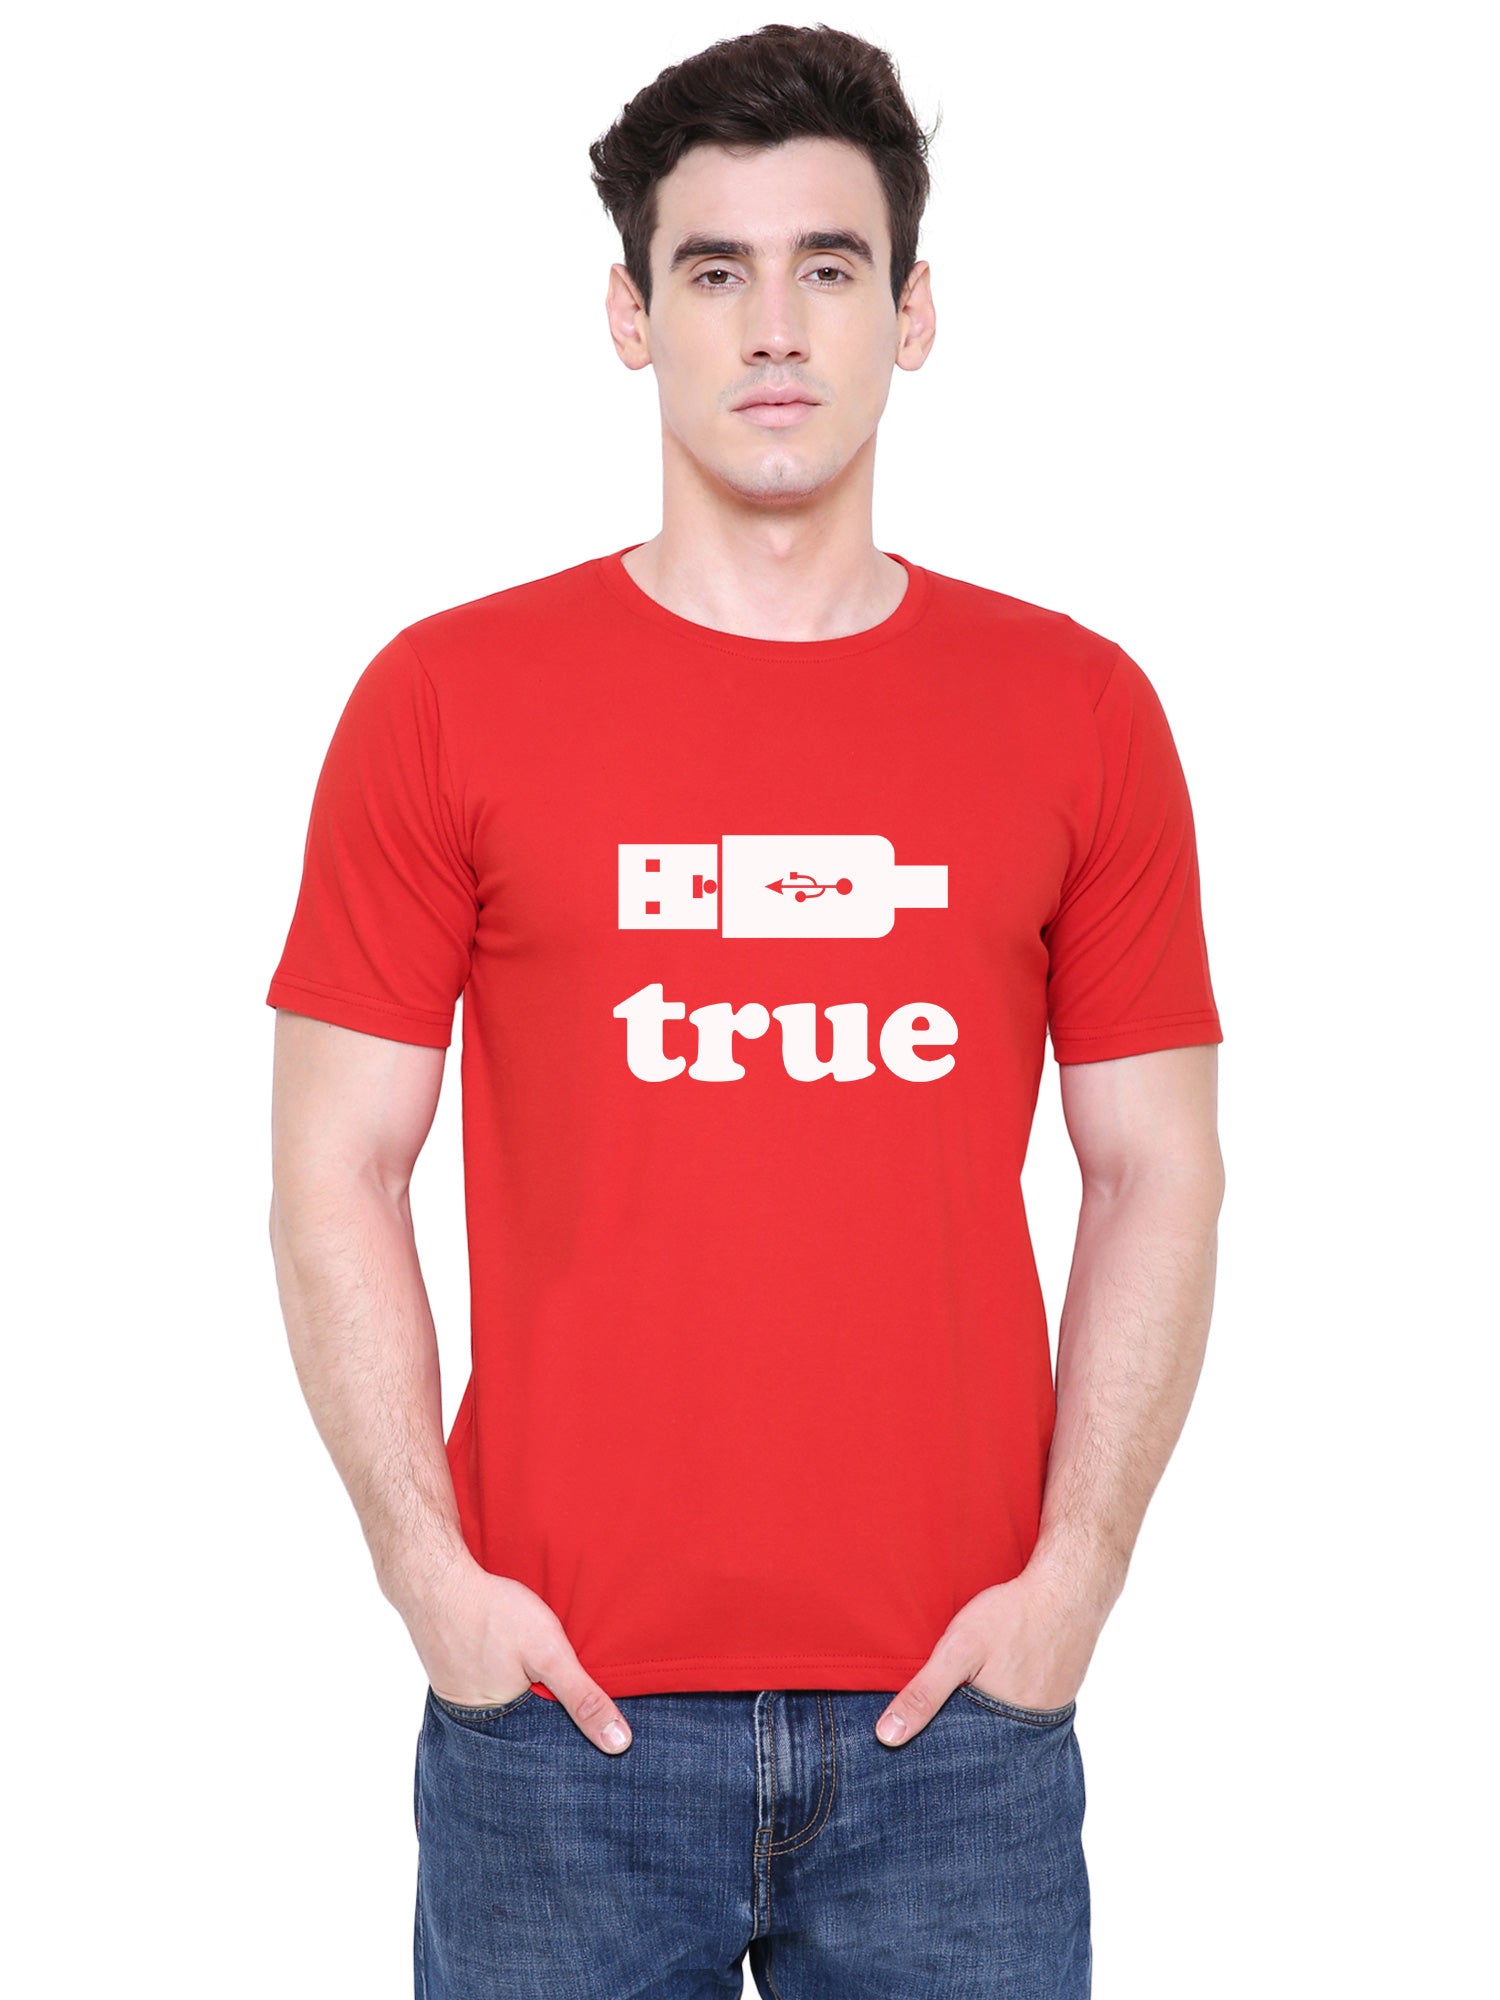 True Love matching Couple T shirts- Red